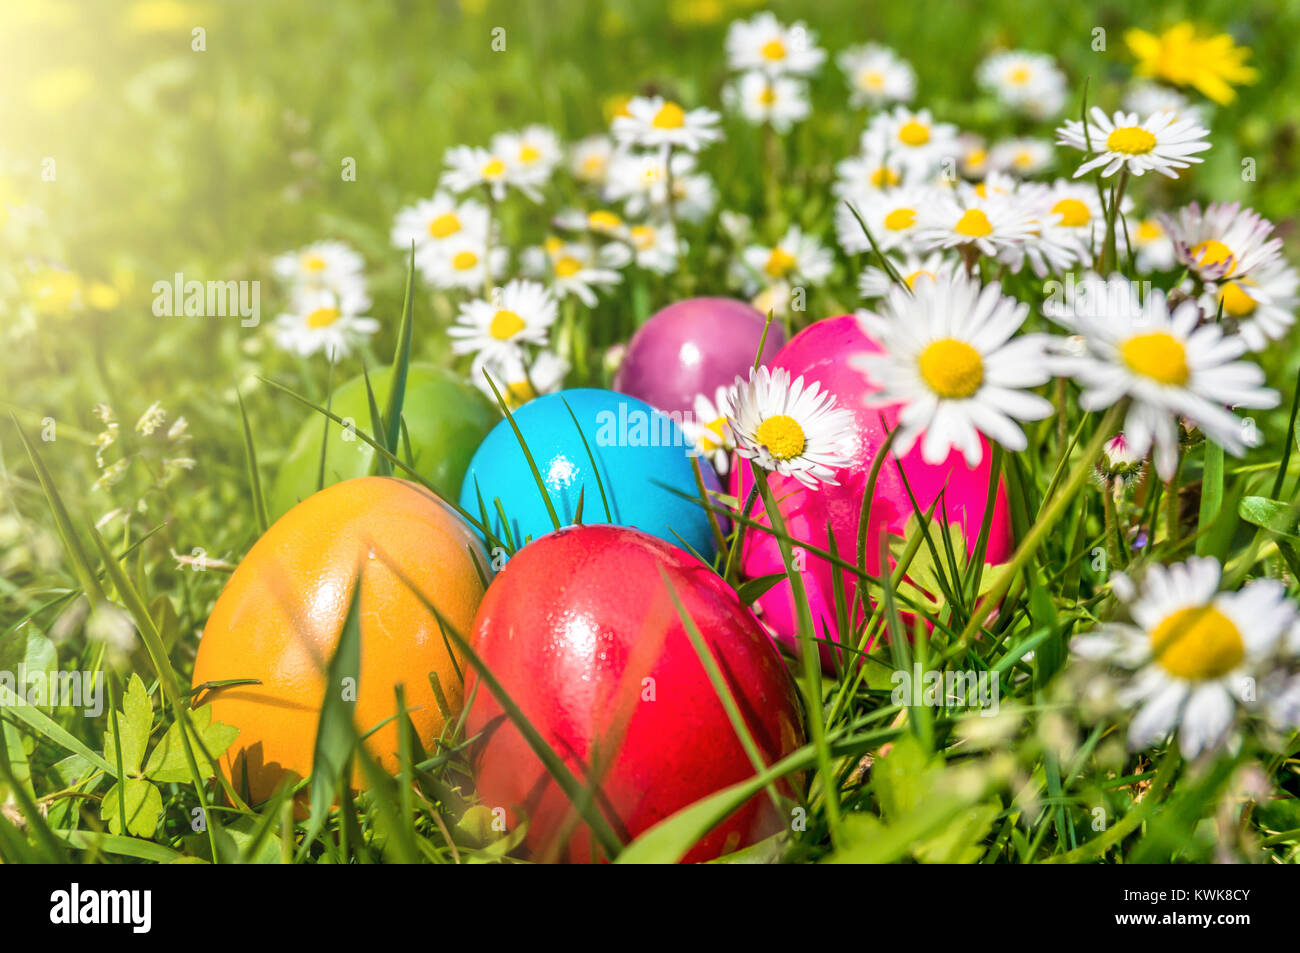 Beautiful view of colorful Easter eggs lying in the grass between daisies and dandelions in the sunshine Stock Photo